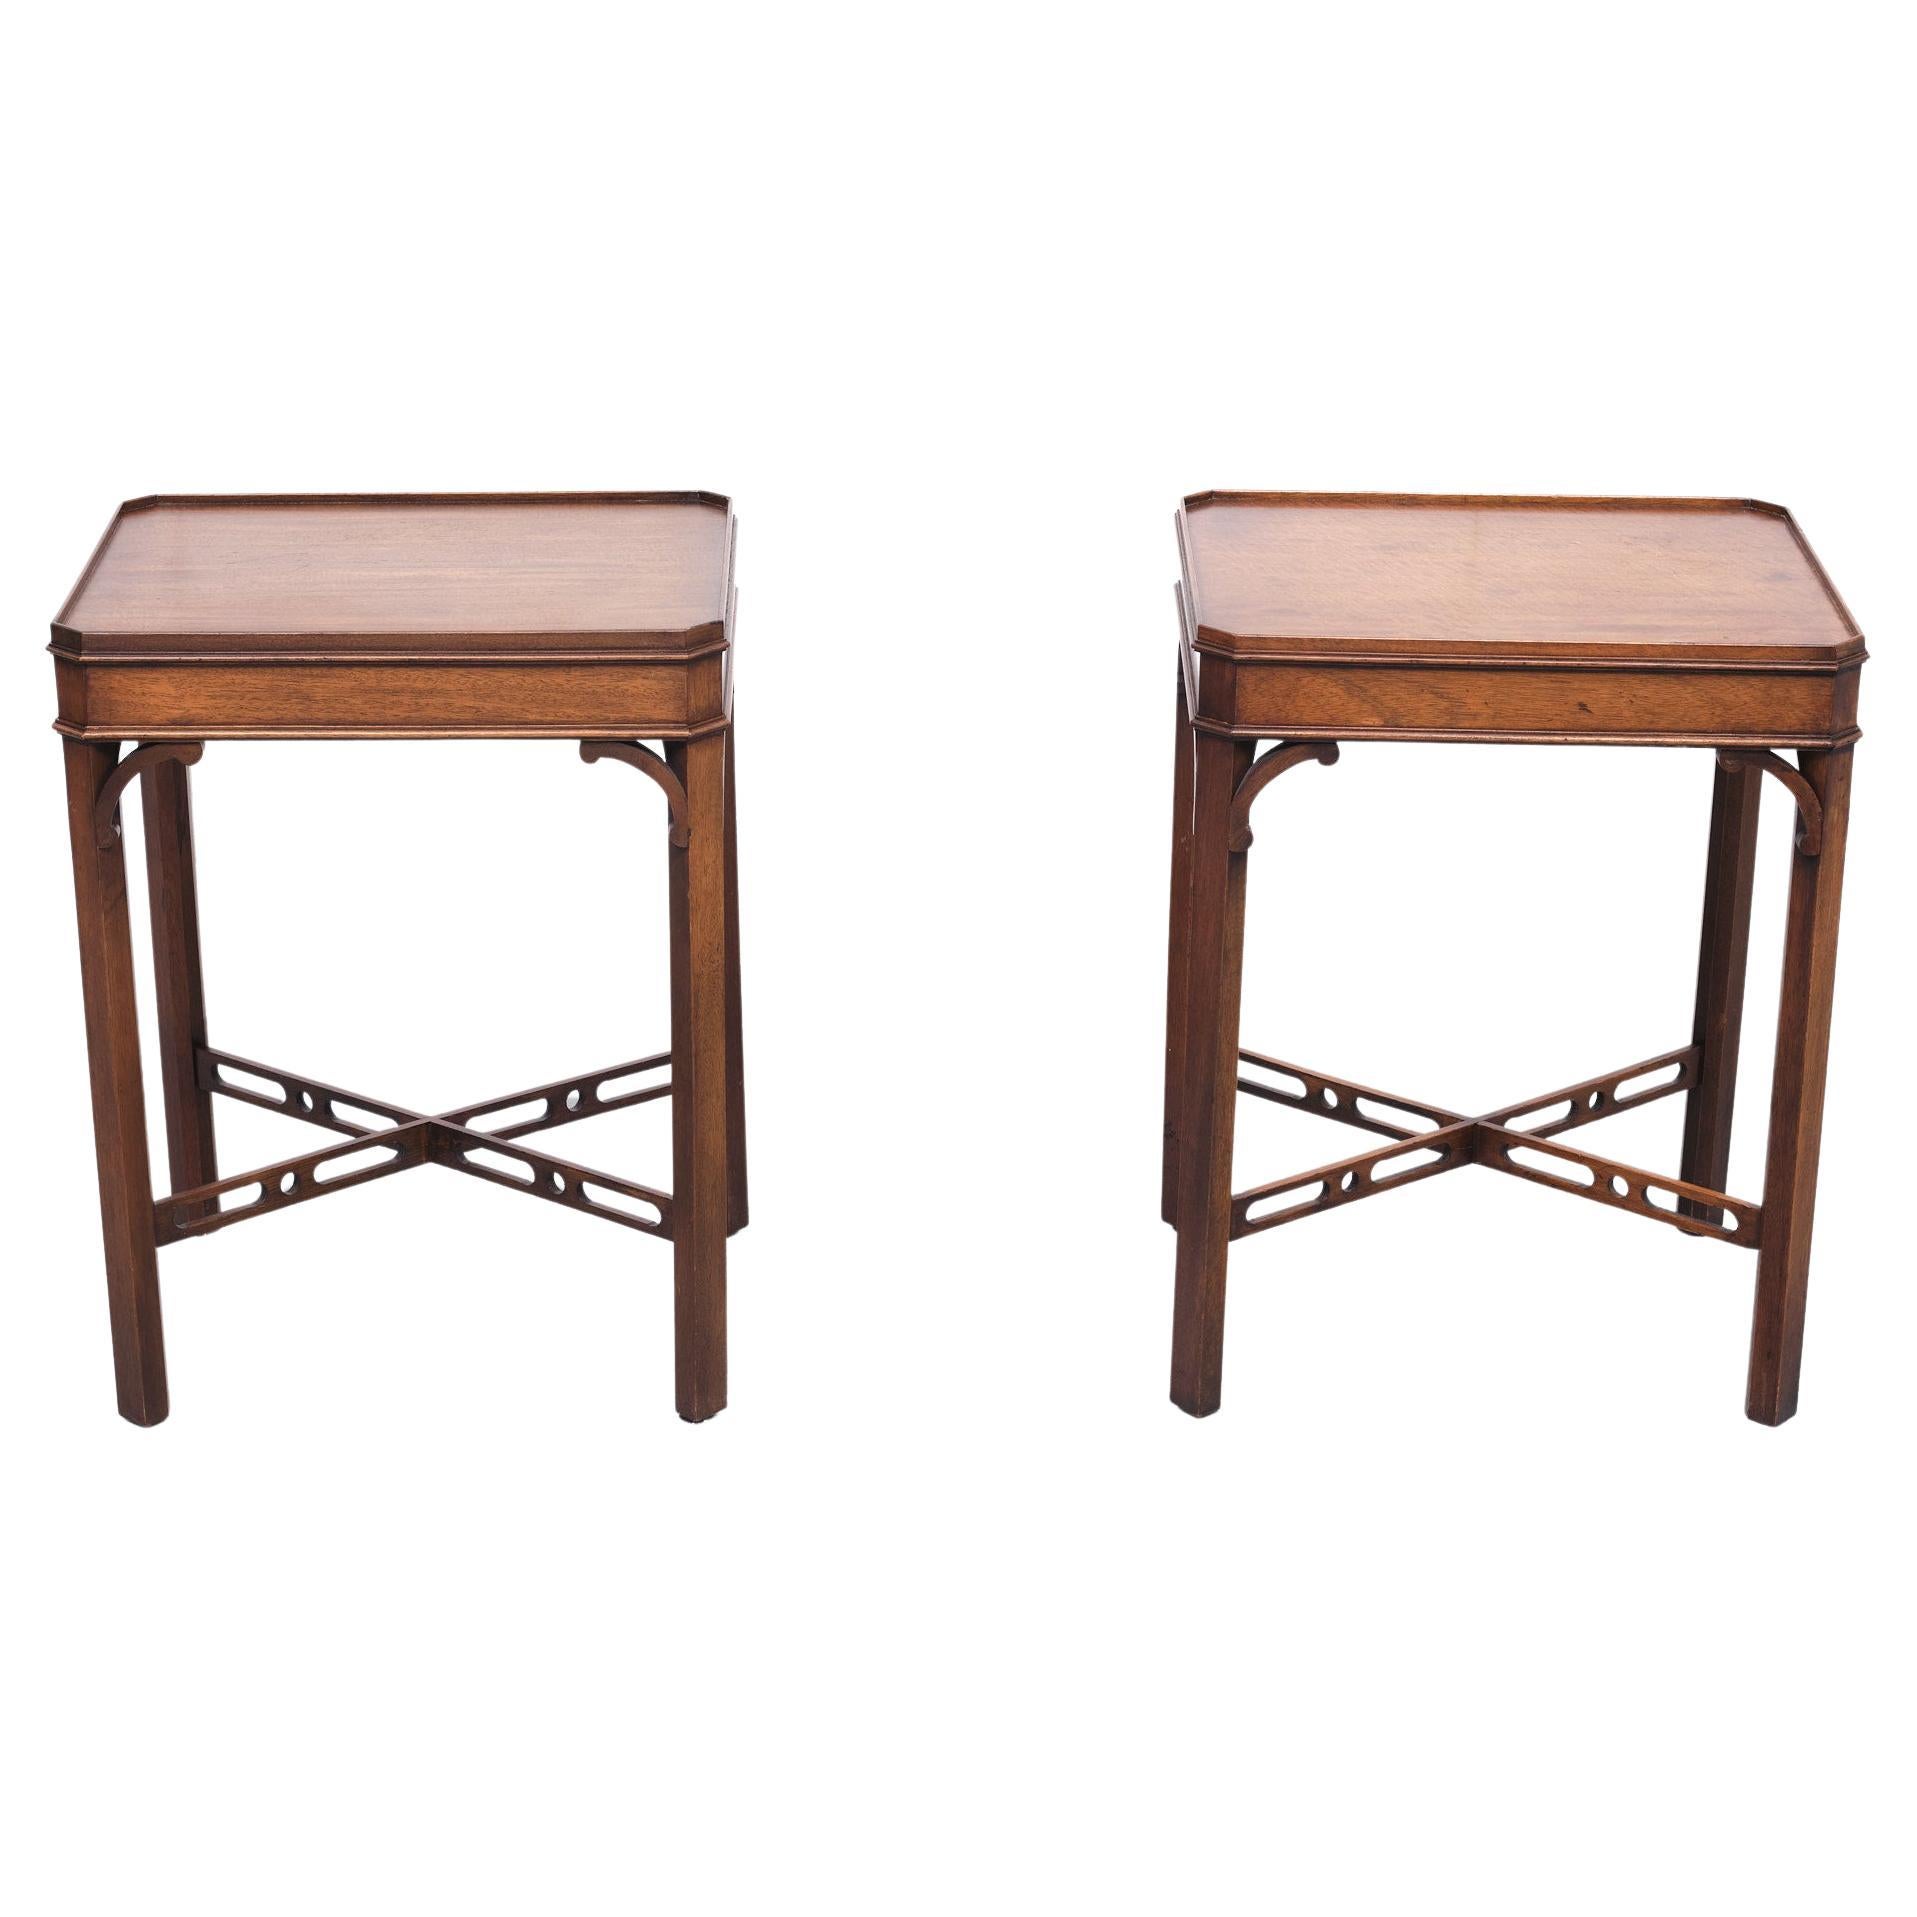 English Bevan Funnell  Mahogany Side Tables  Georgian revival    England, 1960s For Sale